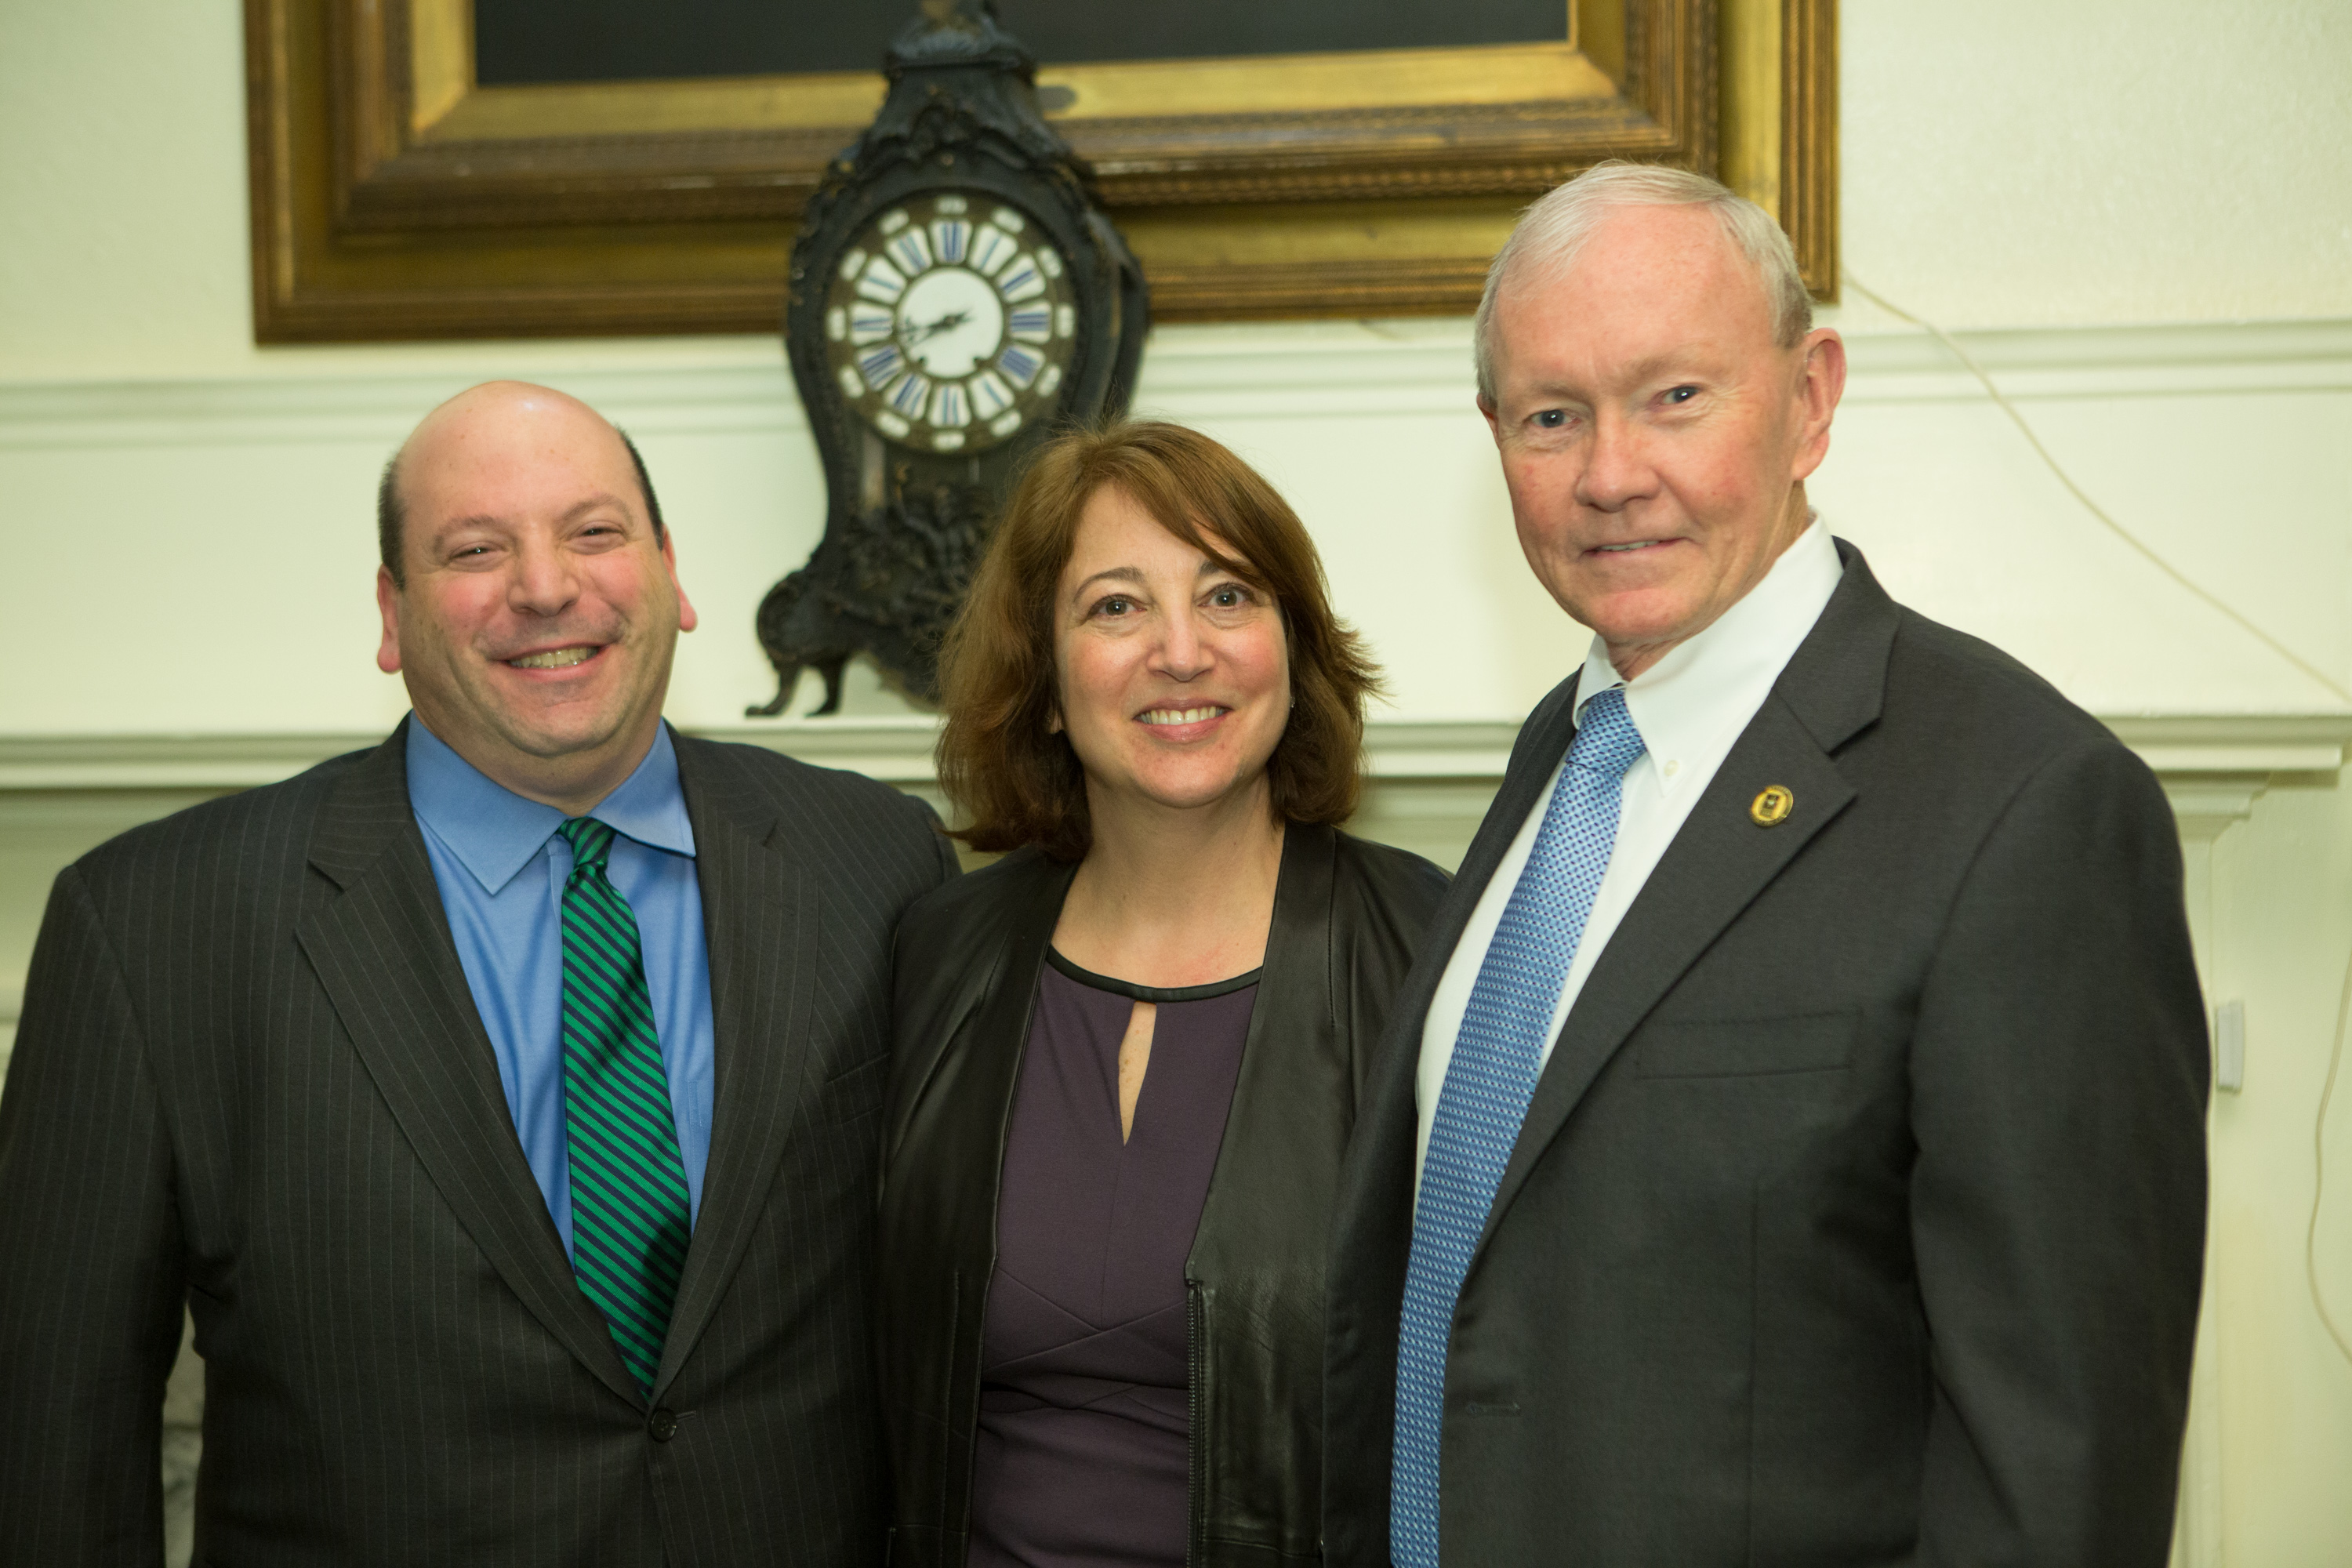 Jeff and Gerri Weiss with Martin Dempsey